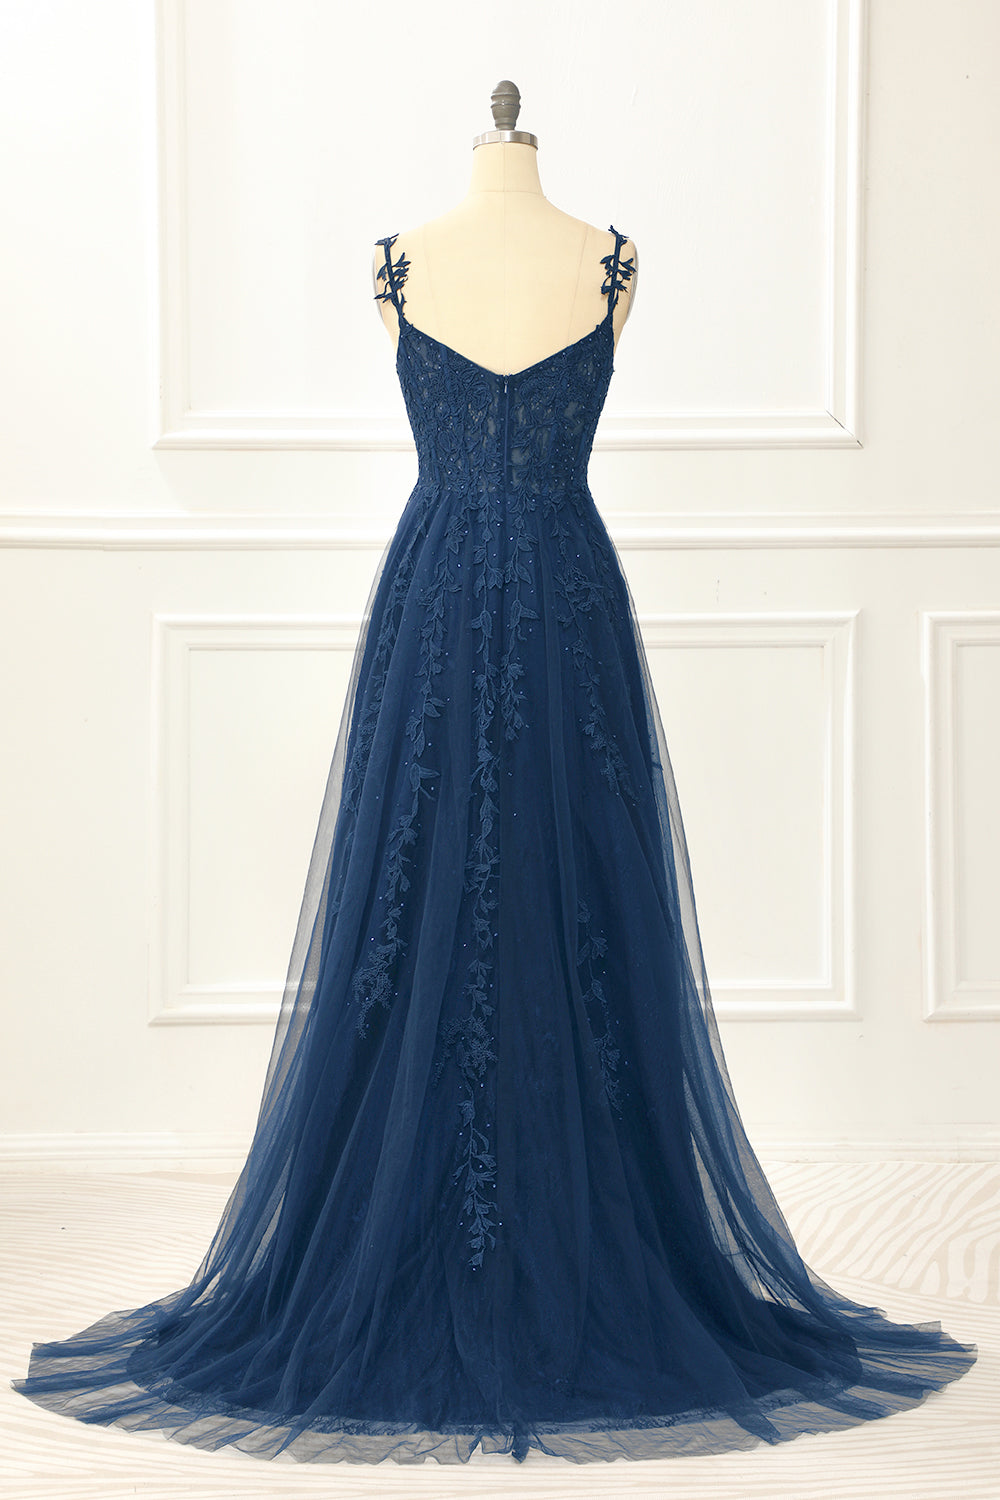 A Line Spaghetti Straps Lace Navy Prom Dress with Appliques